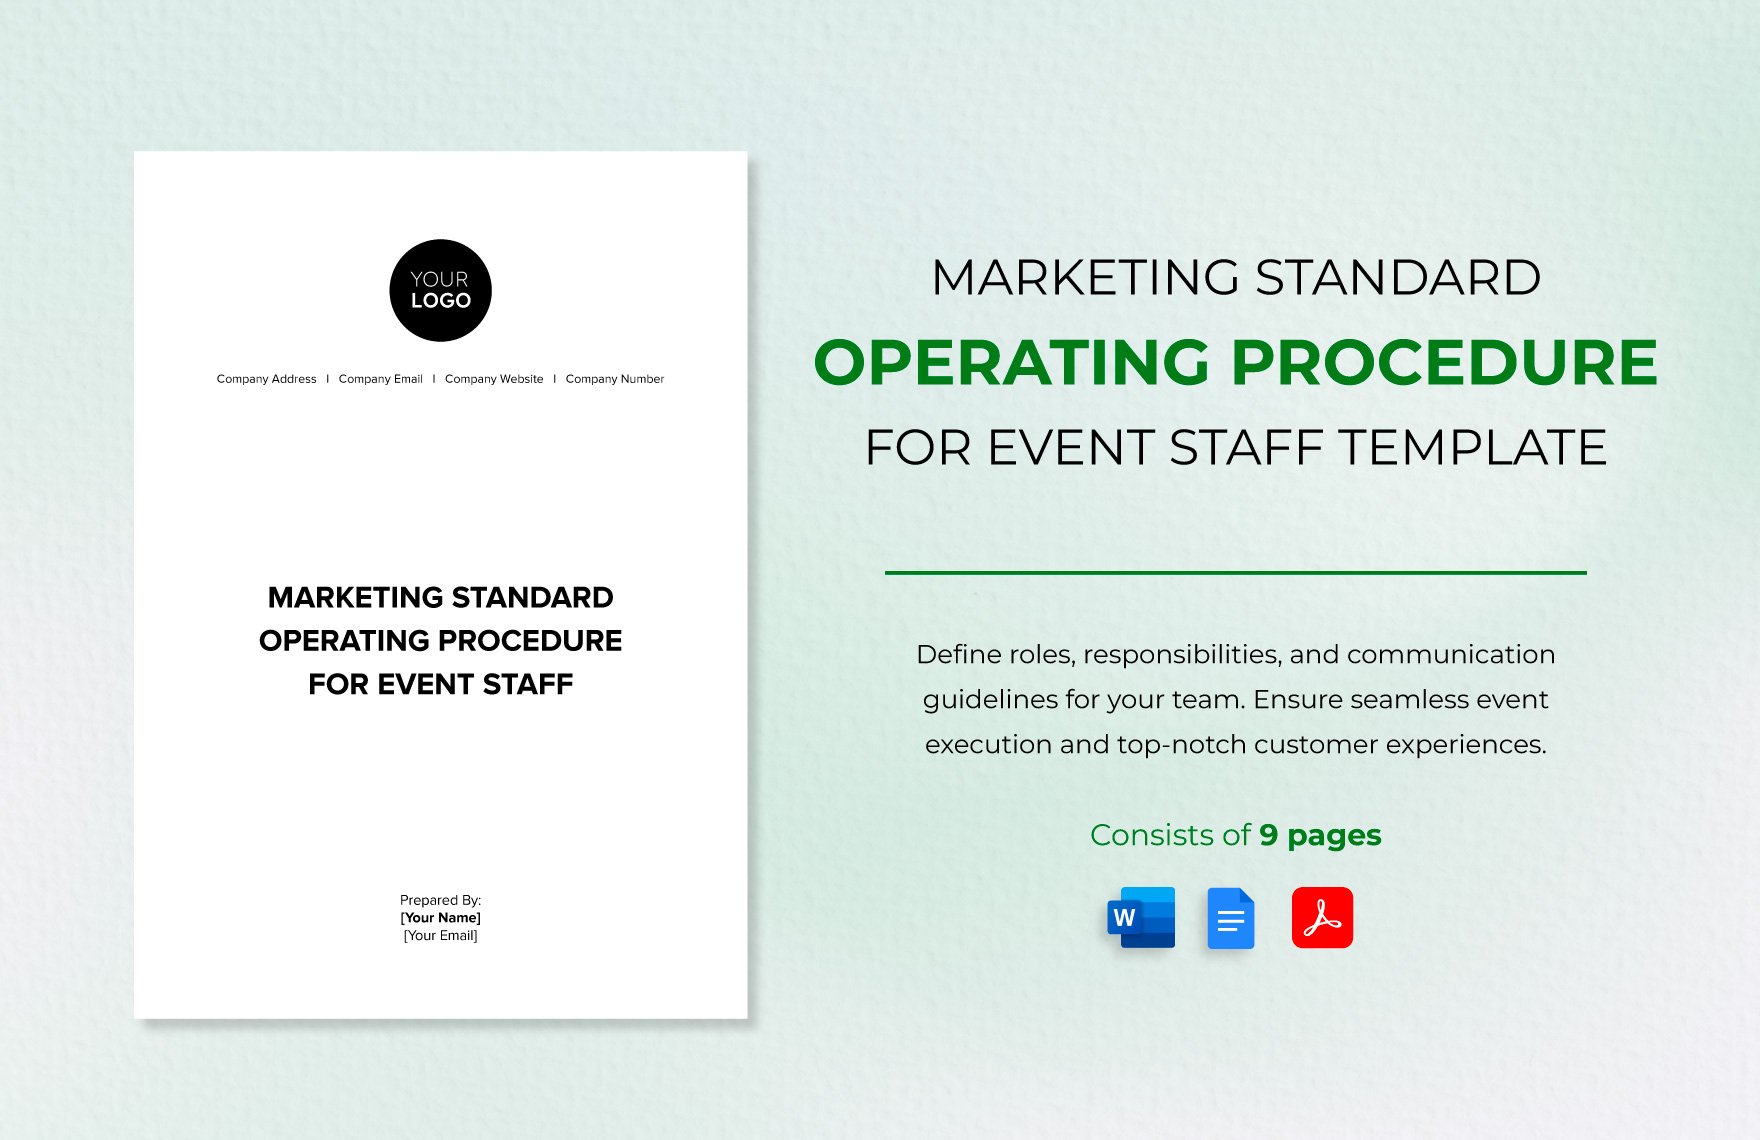 Marketing Standard Operating Procedure for Event Staff Template in Word, Google Docs, PDF